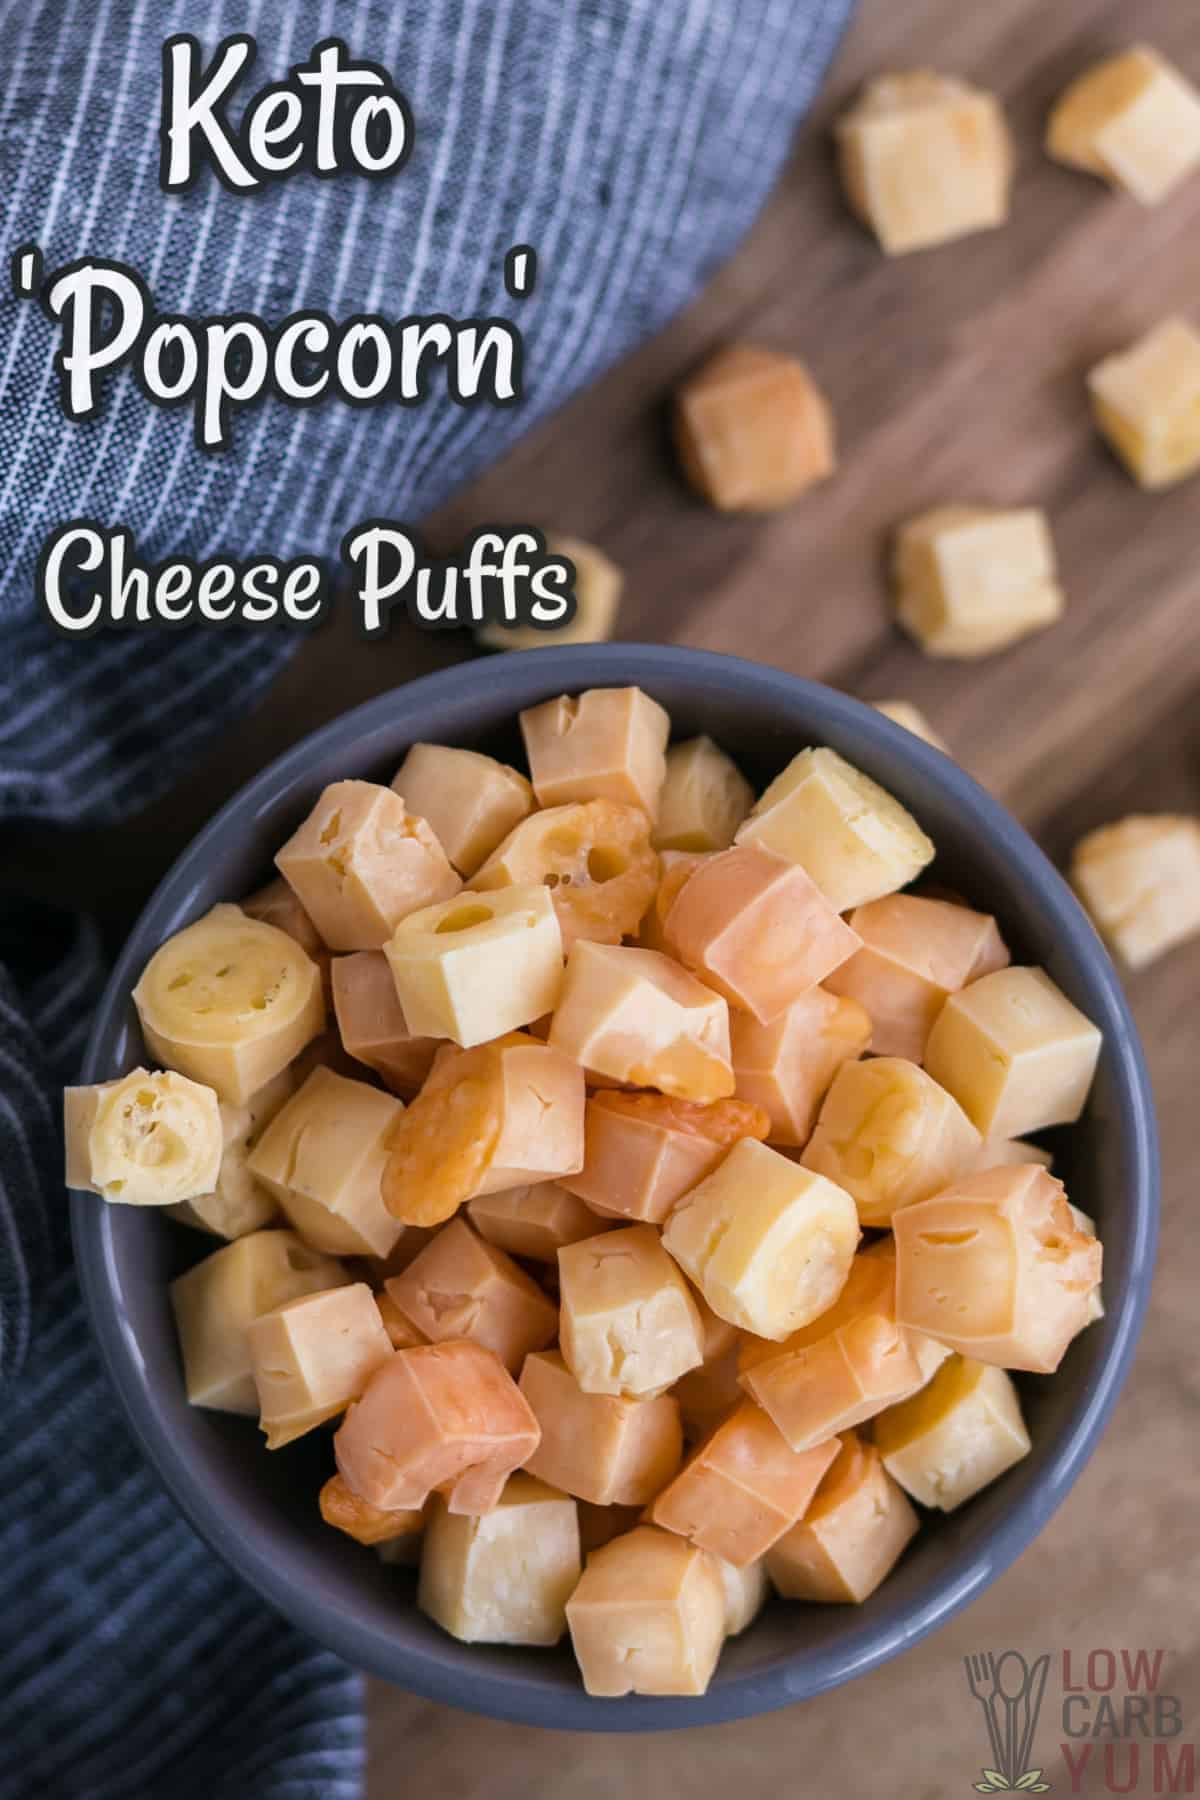 keto popcorn cheese puffs with text overlay.